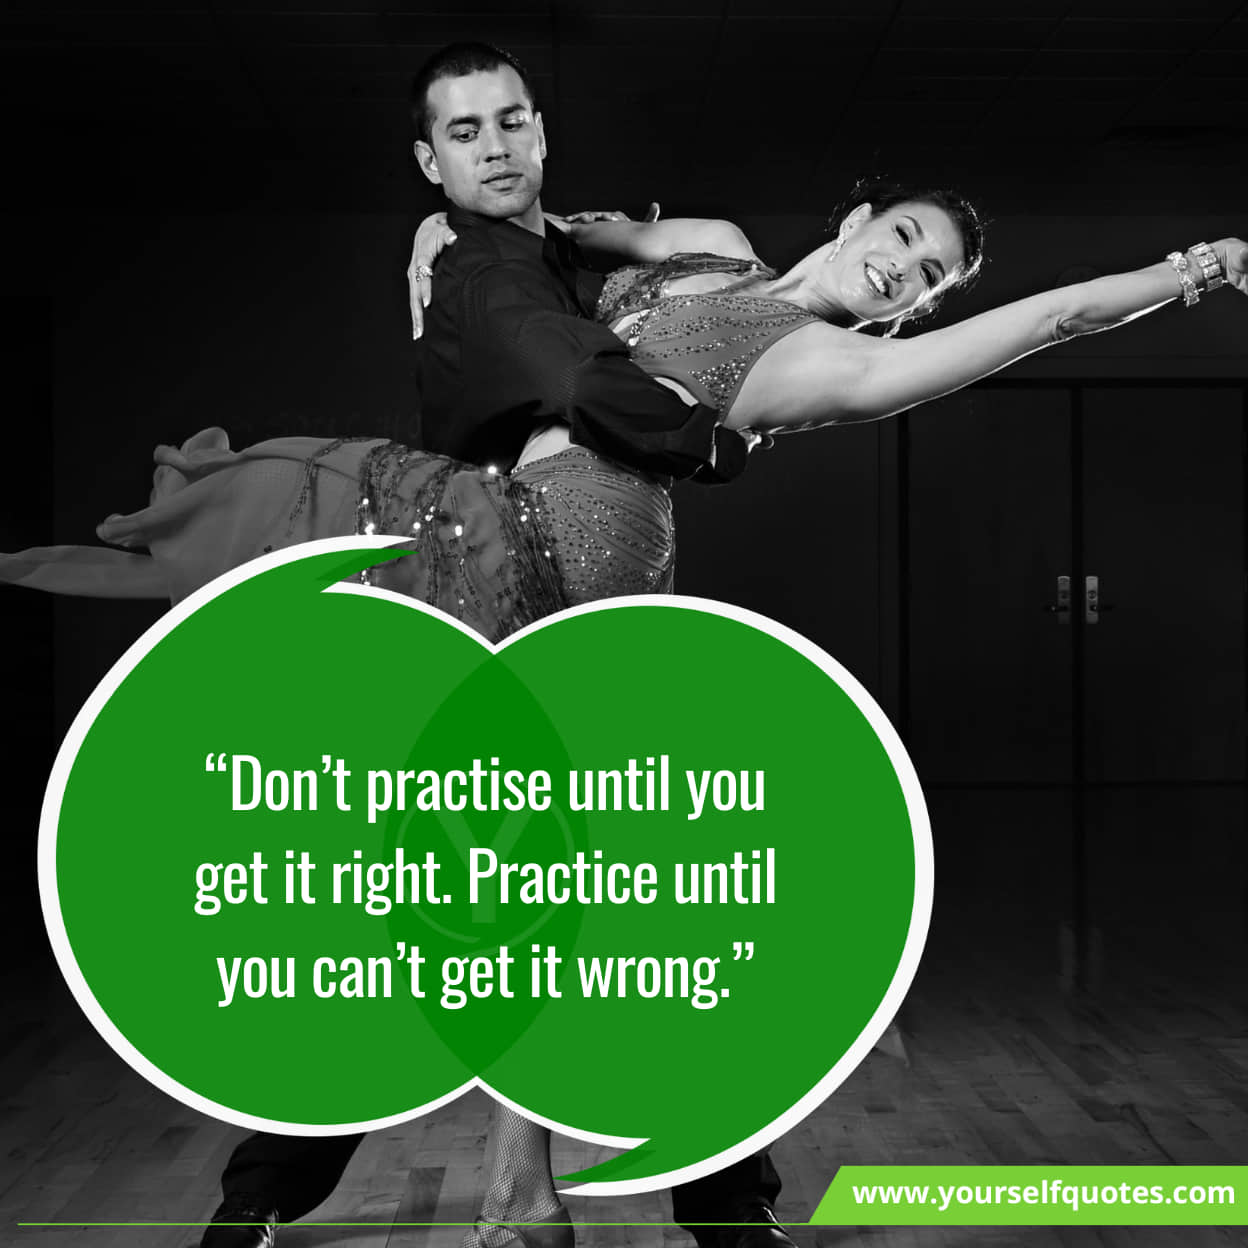 Latest Motivational Quotes On Dance